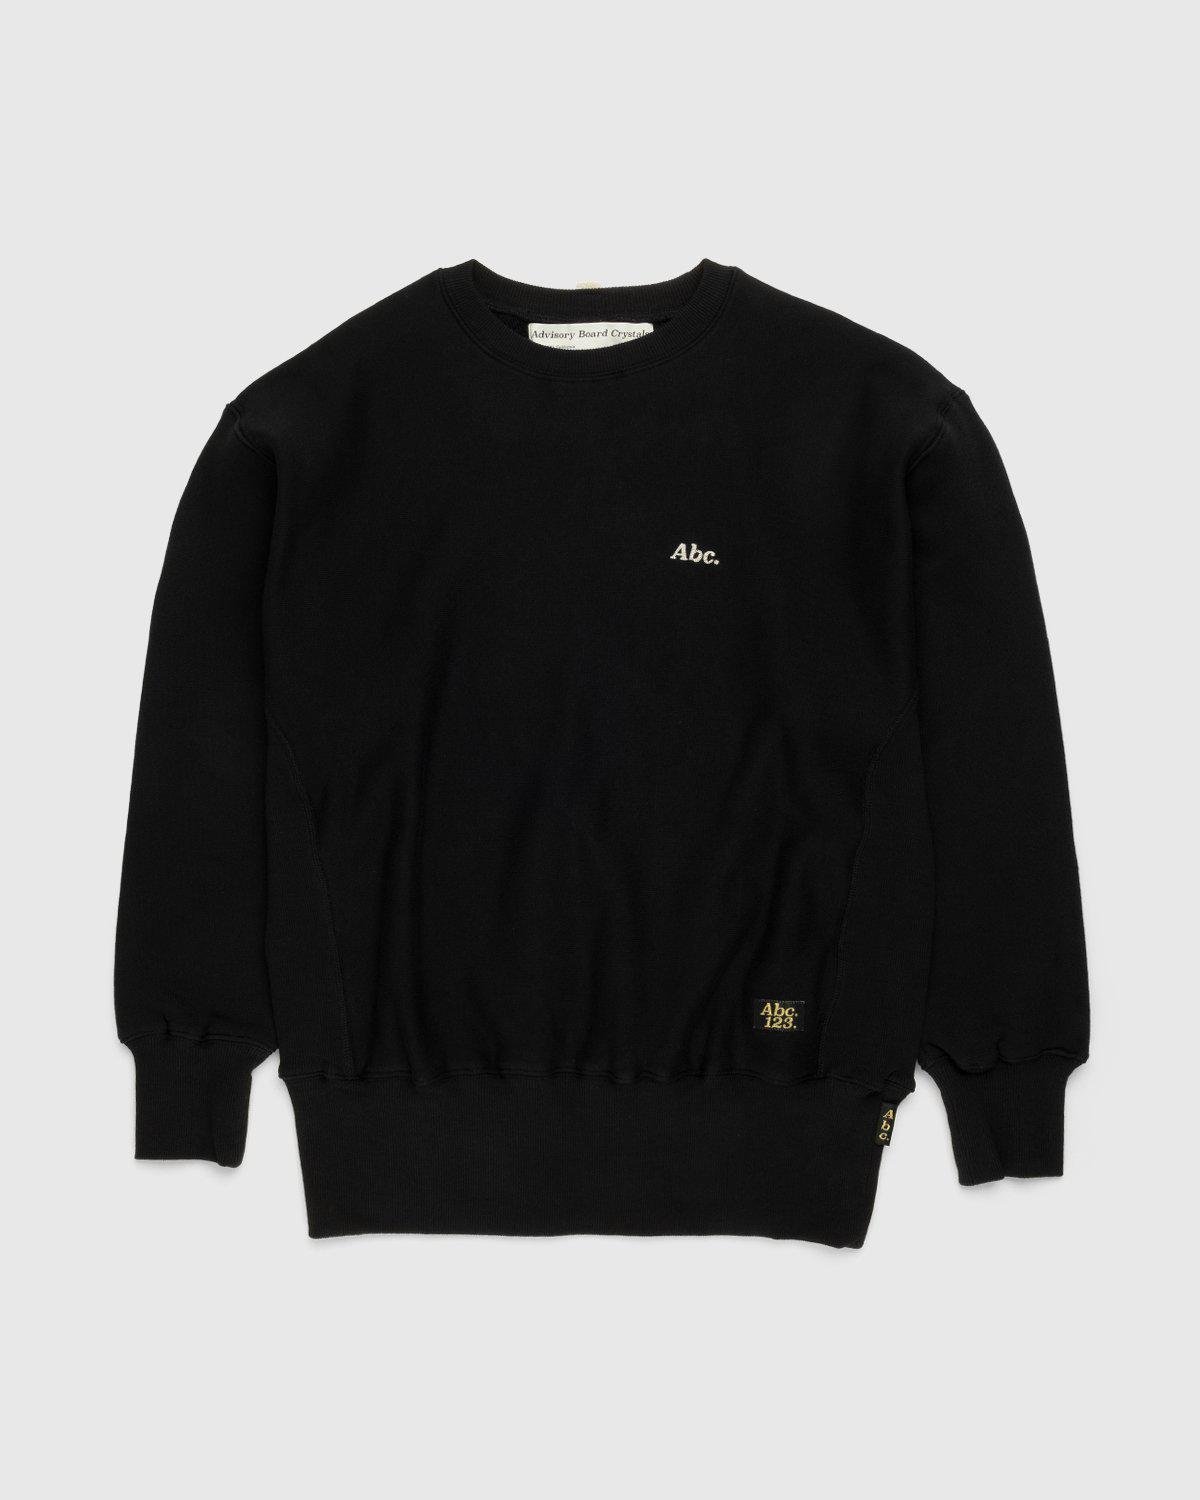 French Terry Crewneck Sweatshirt Anthracite by ABC.